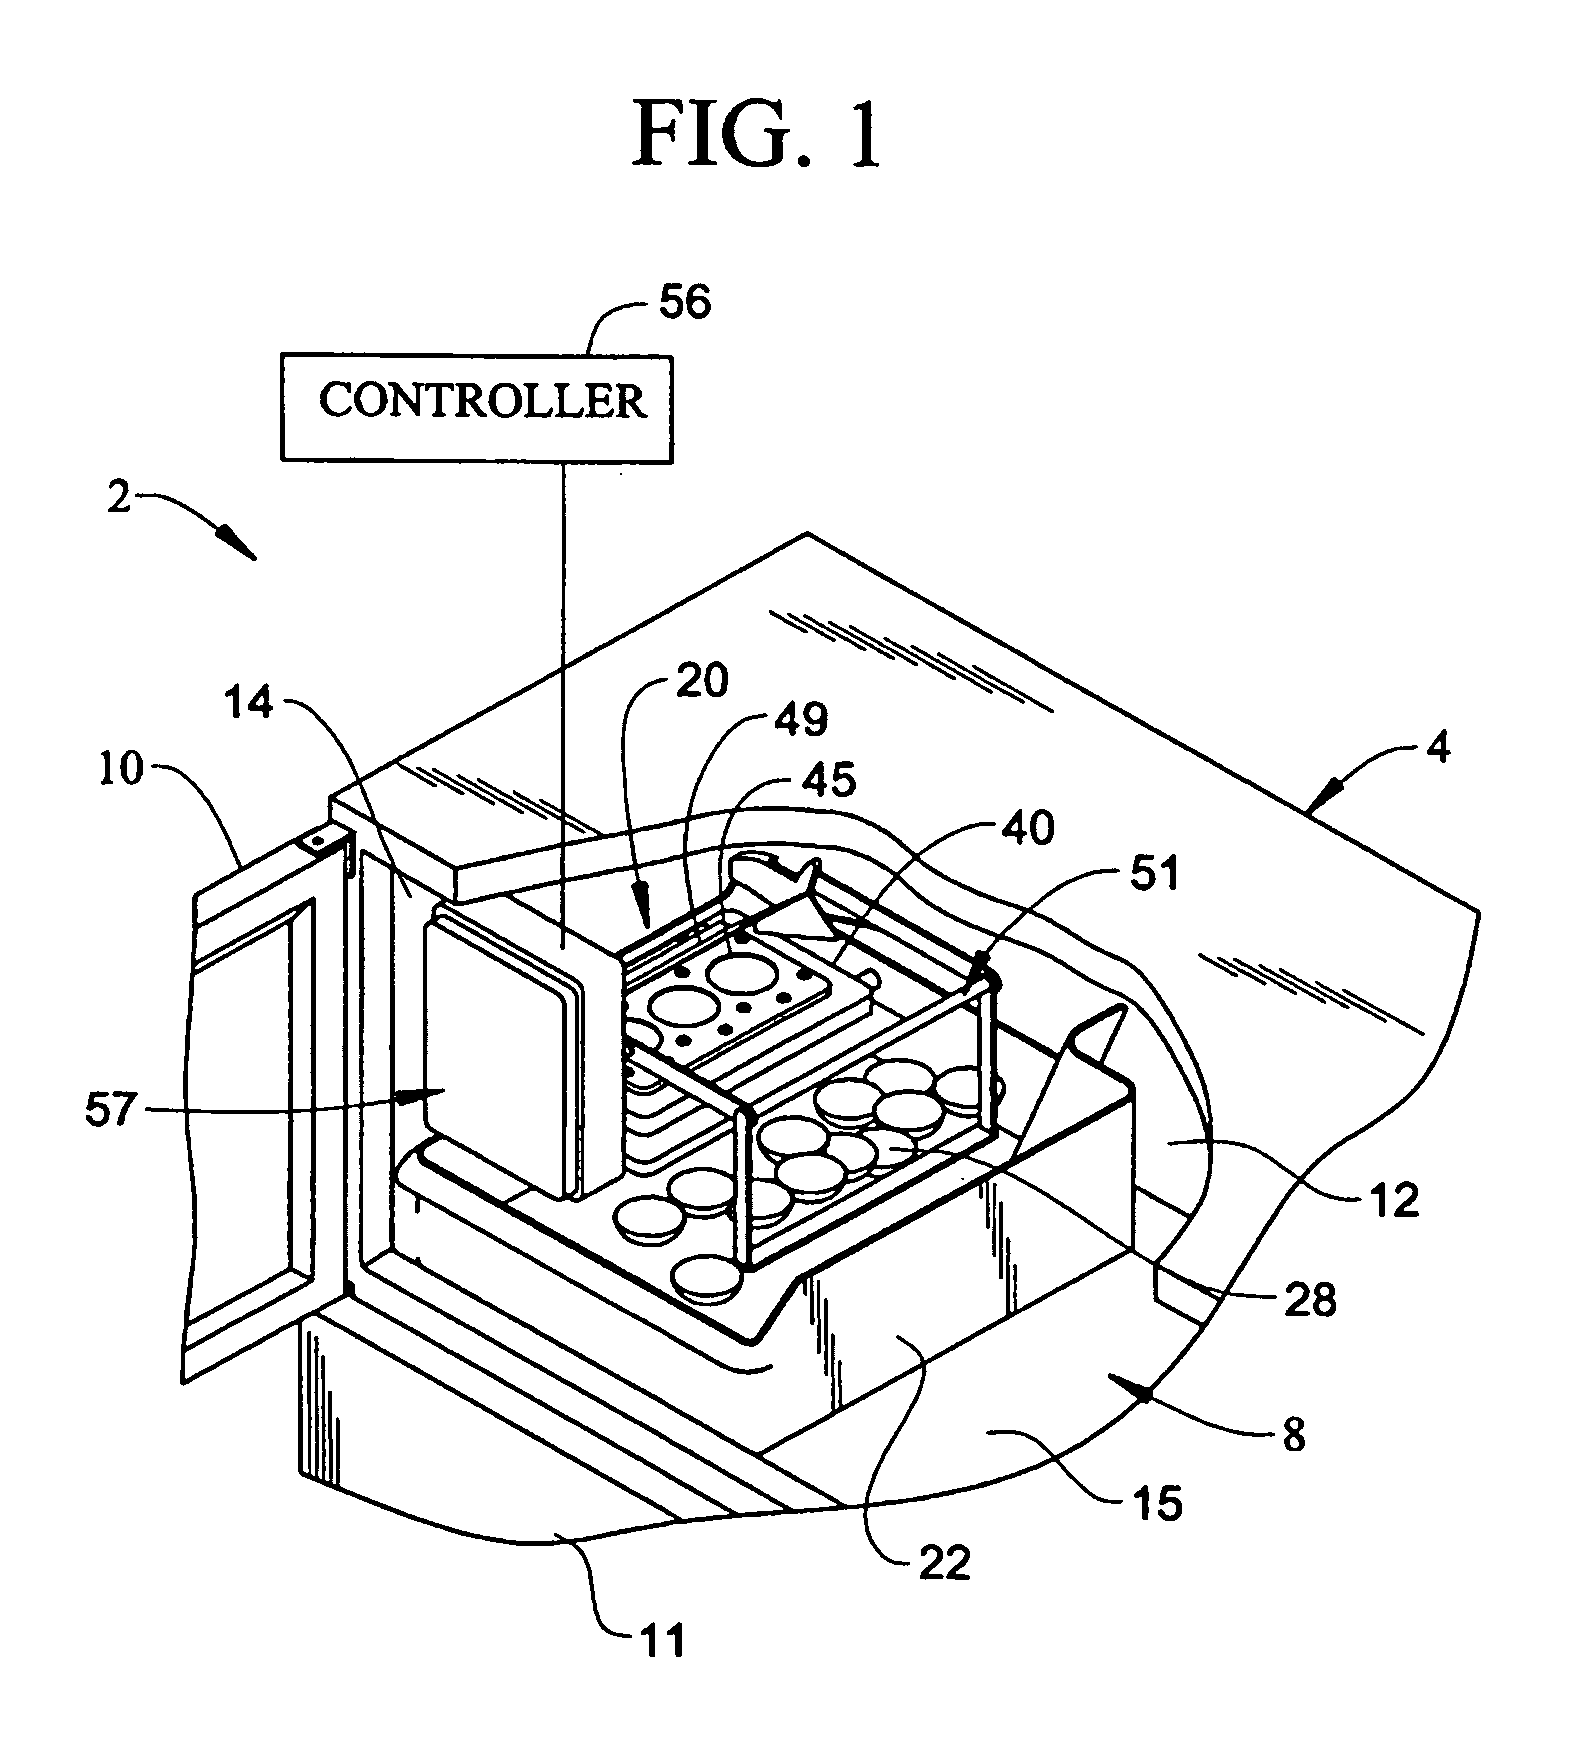 Refrigerator with an automatic compact fluid operated icemaker